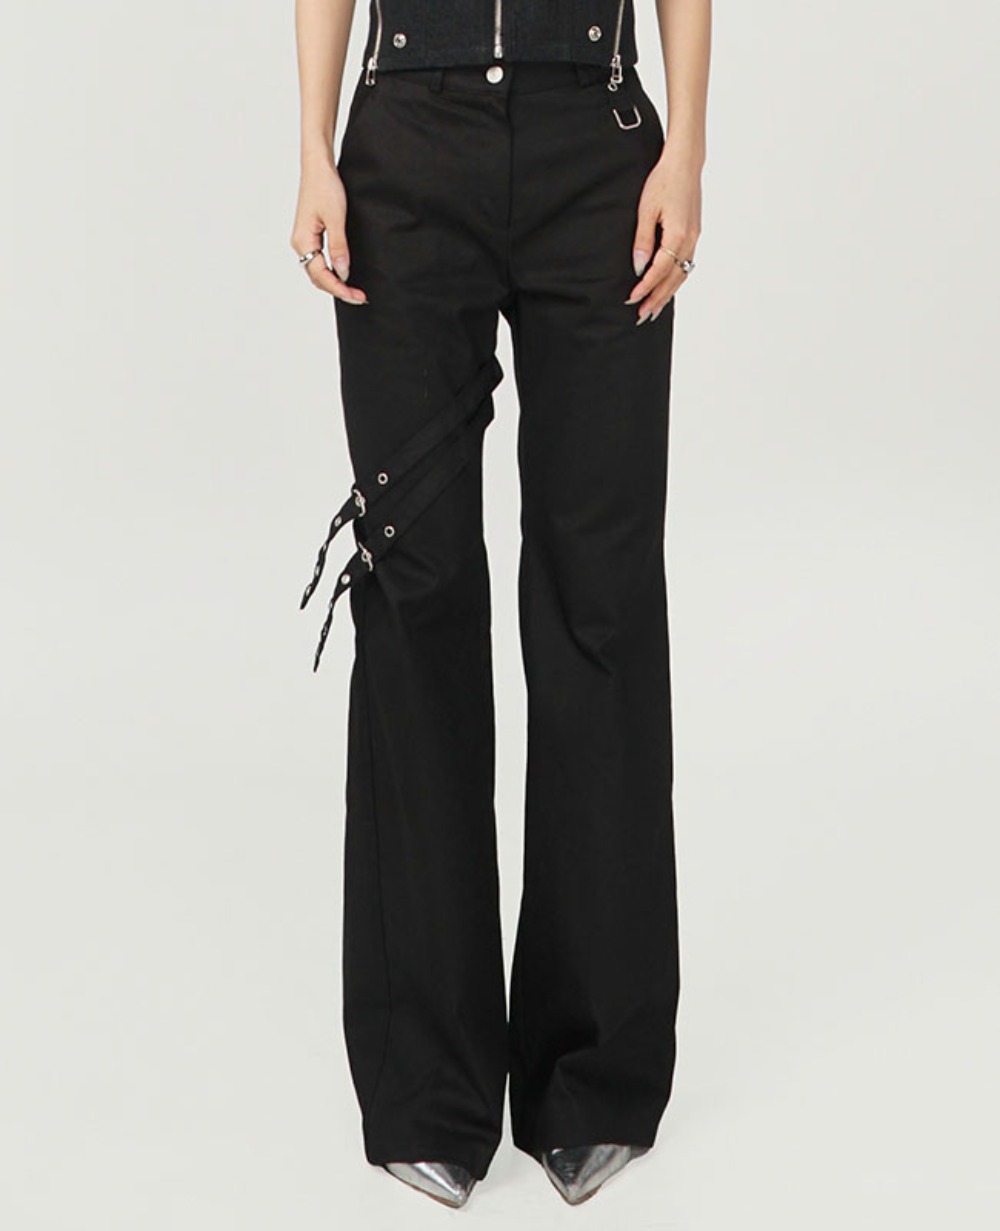 013 belted trouser pants